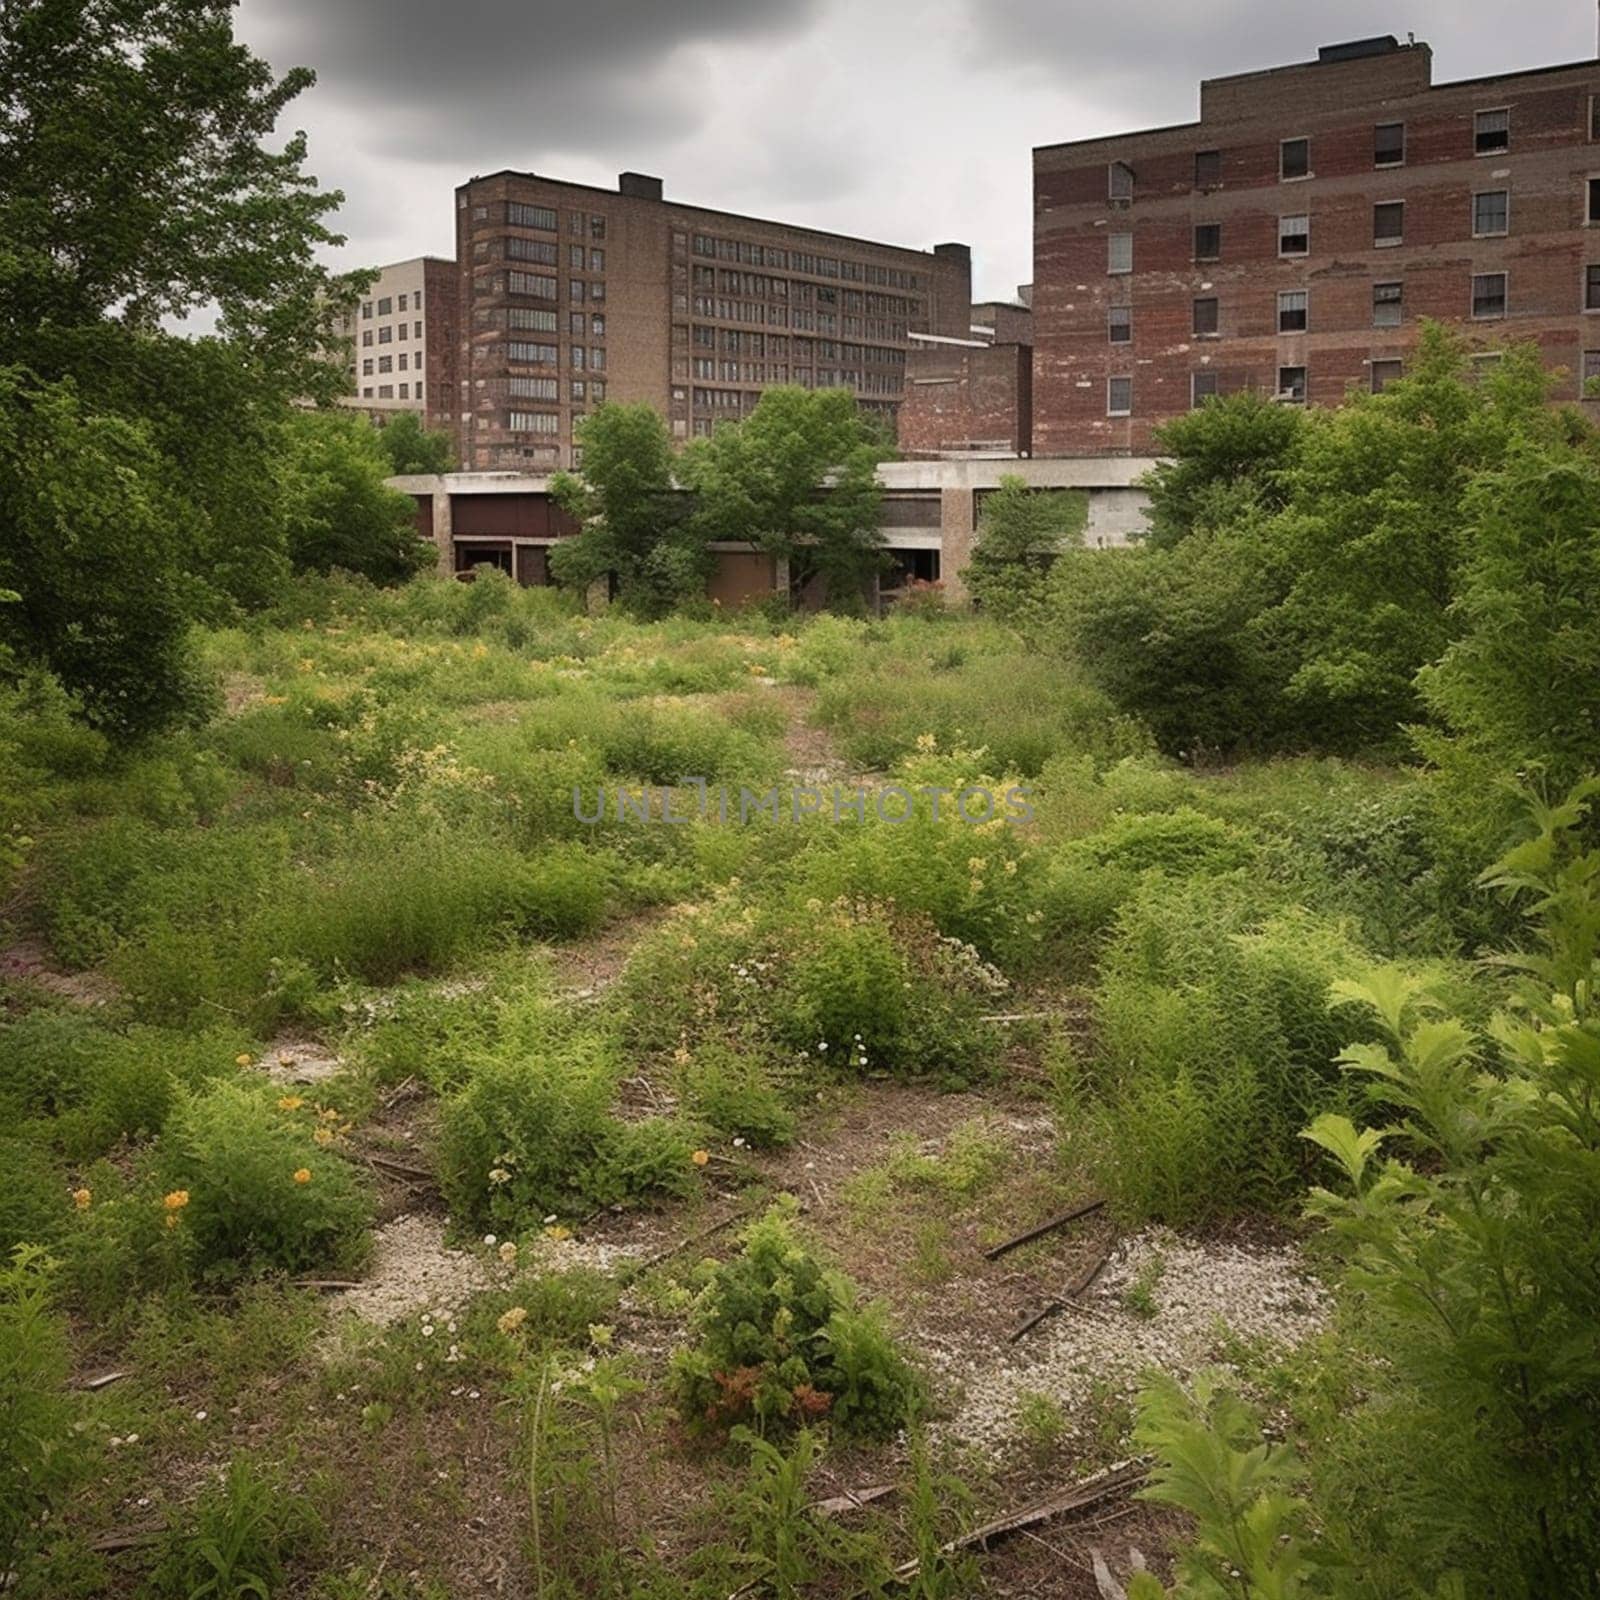 This image captures the beauty in the contrast between the natural beauty of a garden growing in a dilapidated urban space and the decay of the surrounding environment. The garden could be growing in an abandoned parking lot or an old industrial site, for example. The garden is filled with hardy plants and flowers that thrive in the urban environment. The image conveys the sense of hope and renewal that comes from seeing something beautiful growing in a space that has been abandoned or neglected.